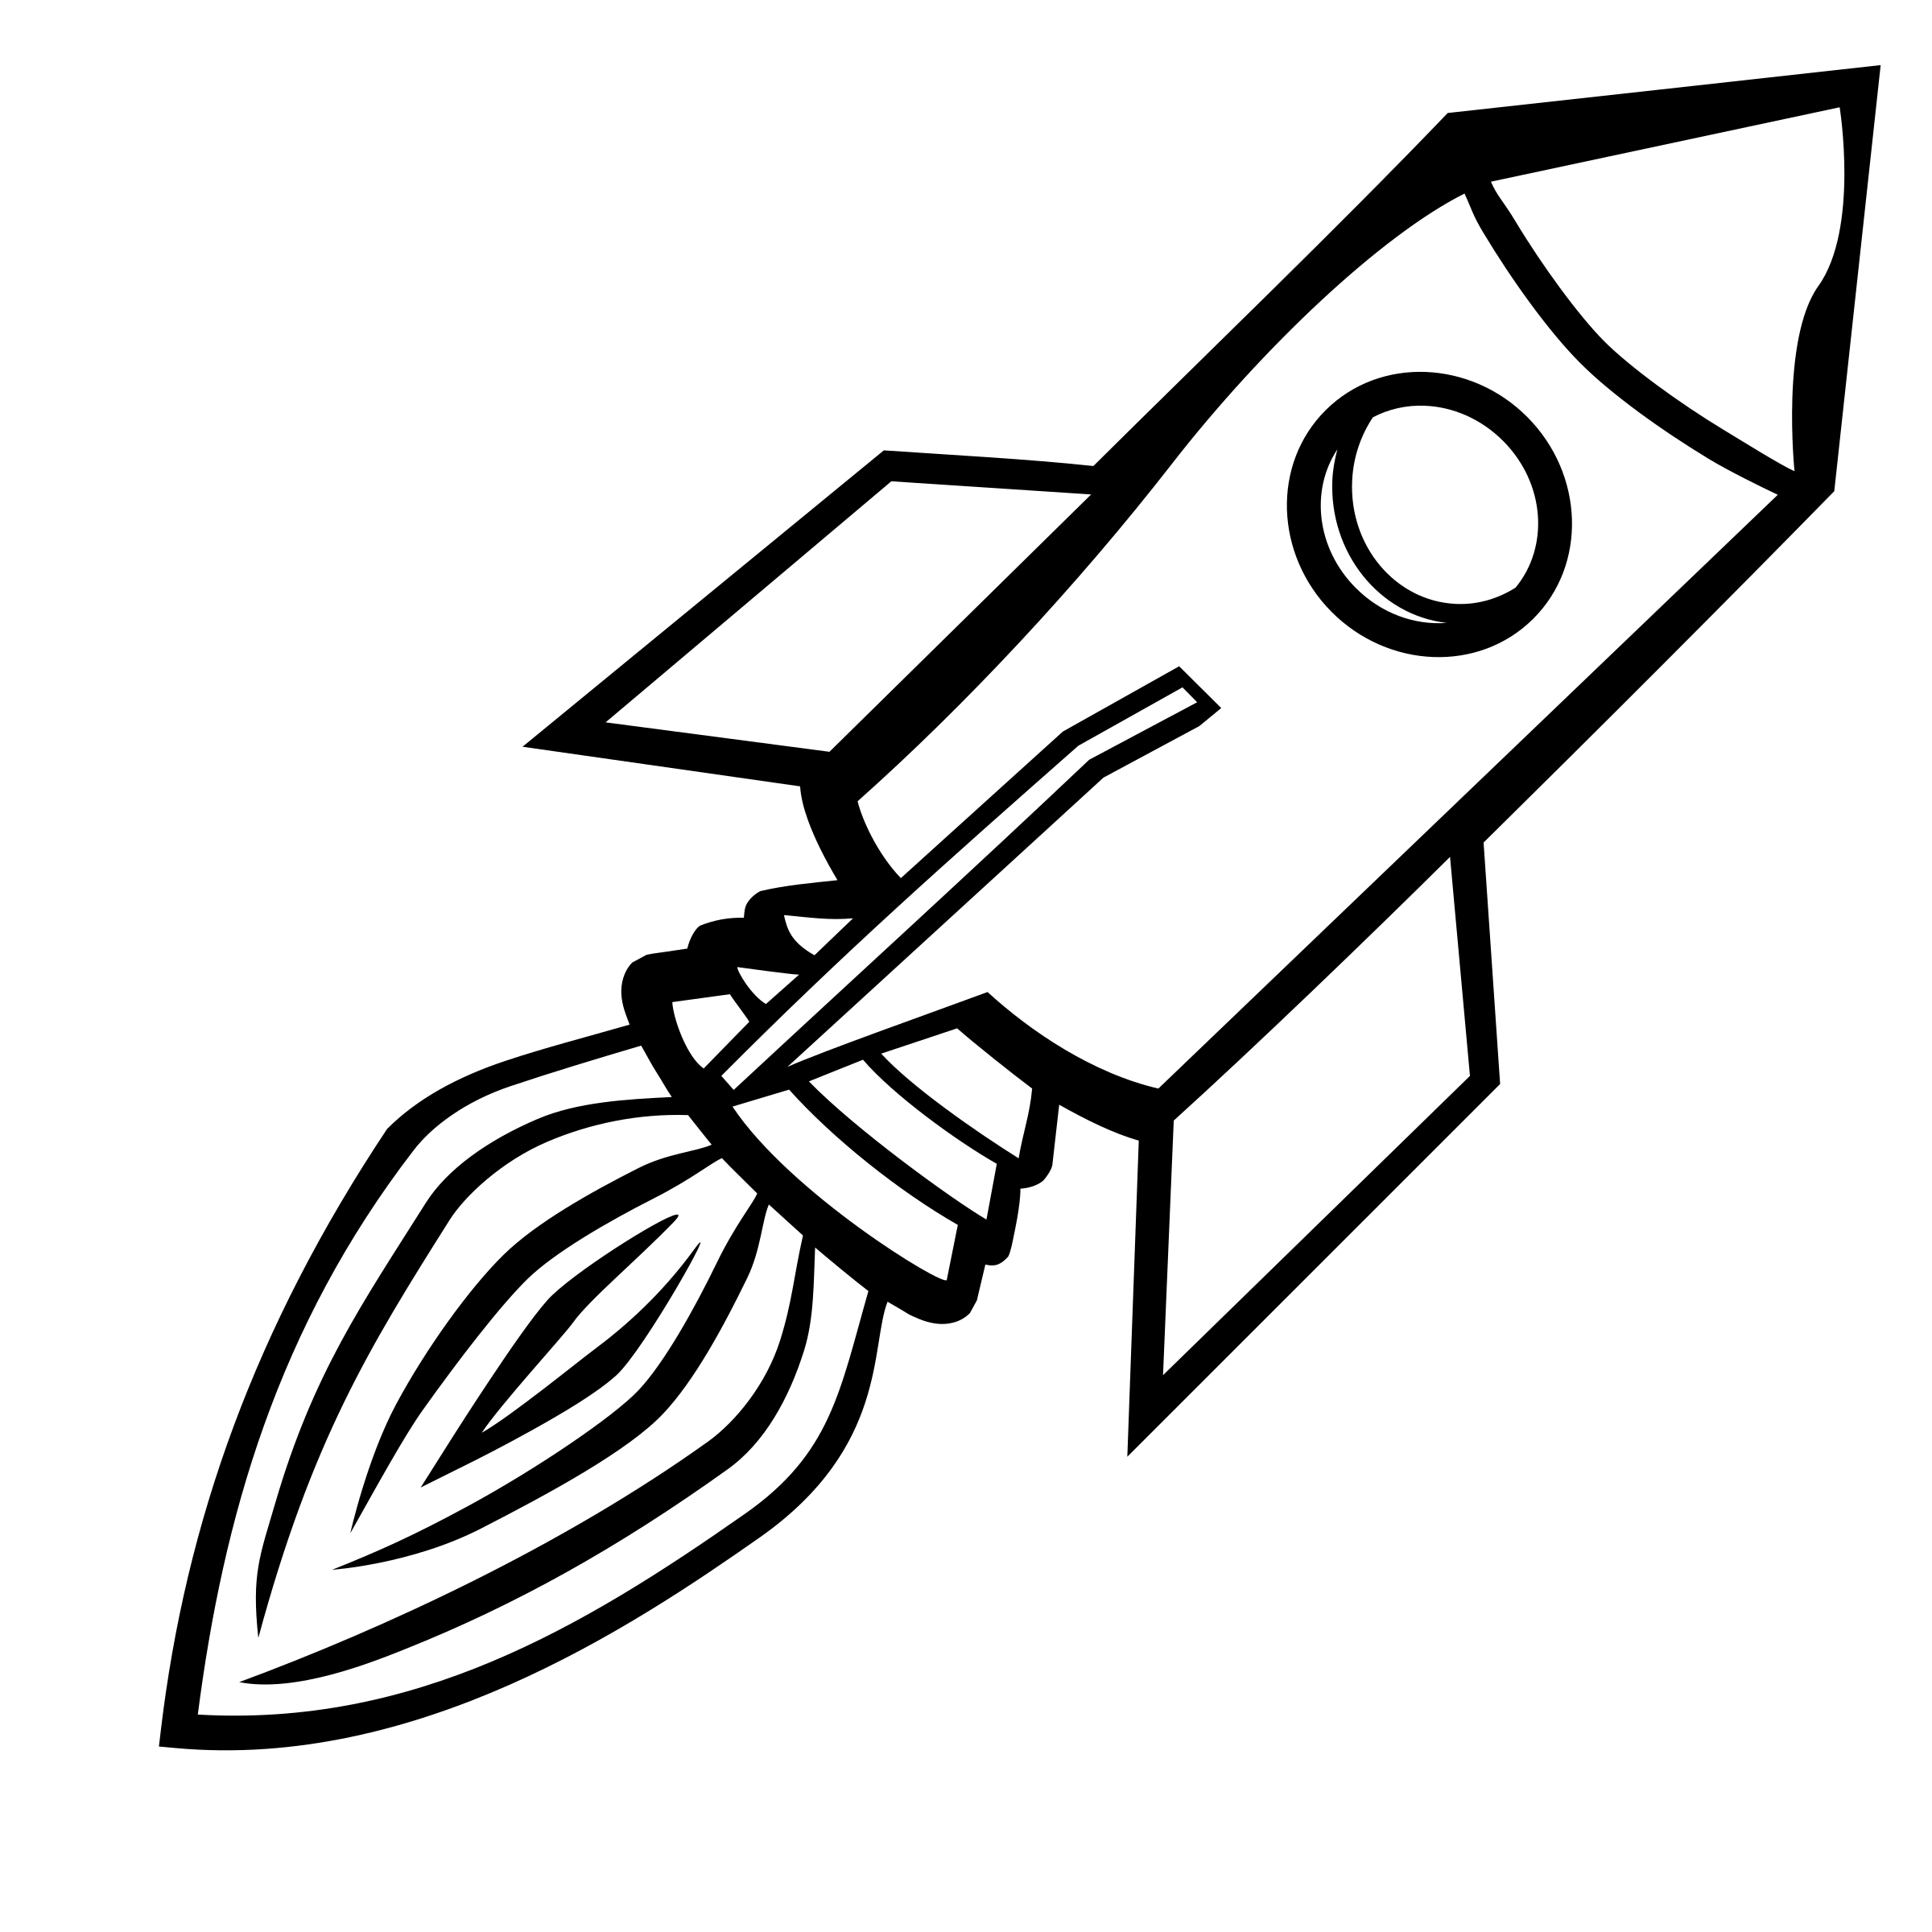 rocket ship clipart black and white - photo #23